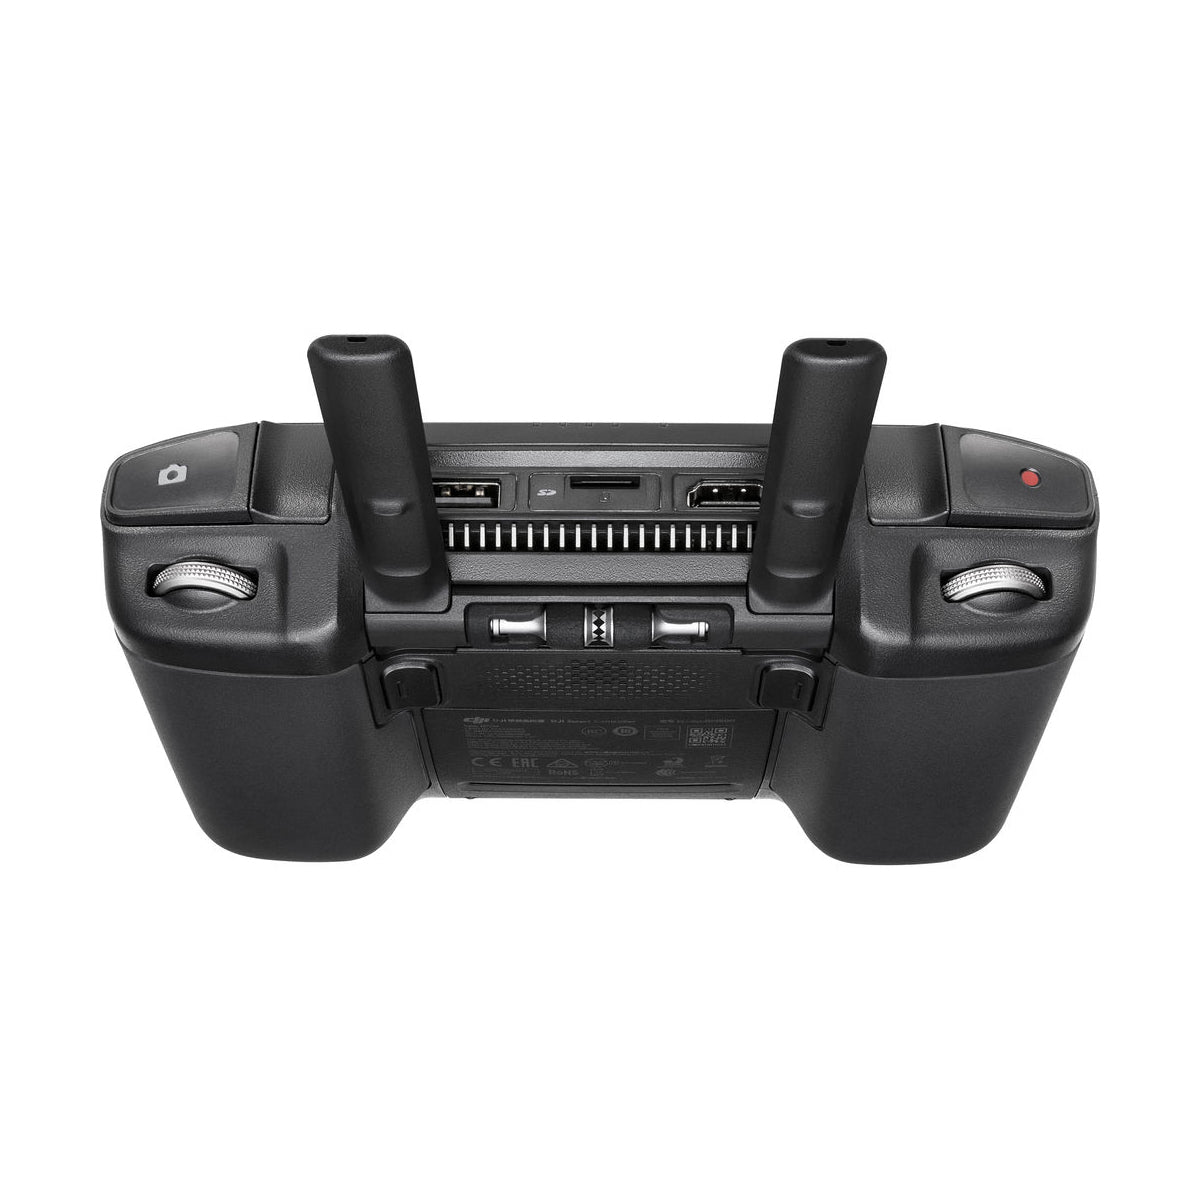 DJI Air 2S Fly More Combo with Smart Controller